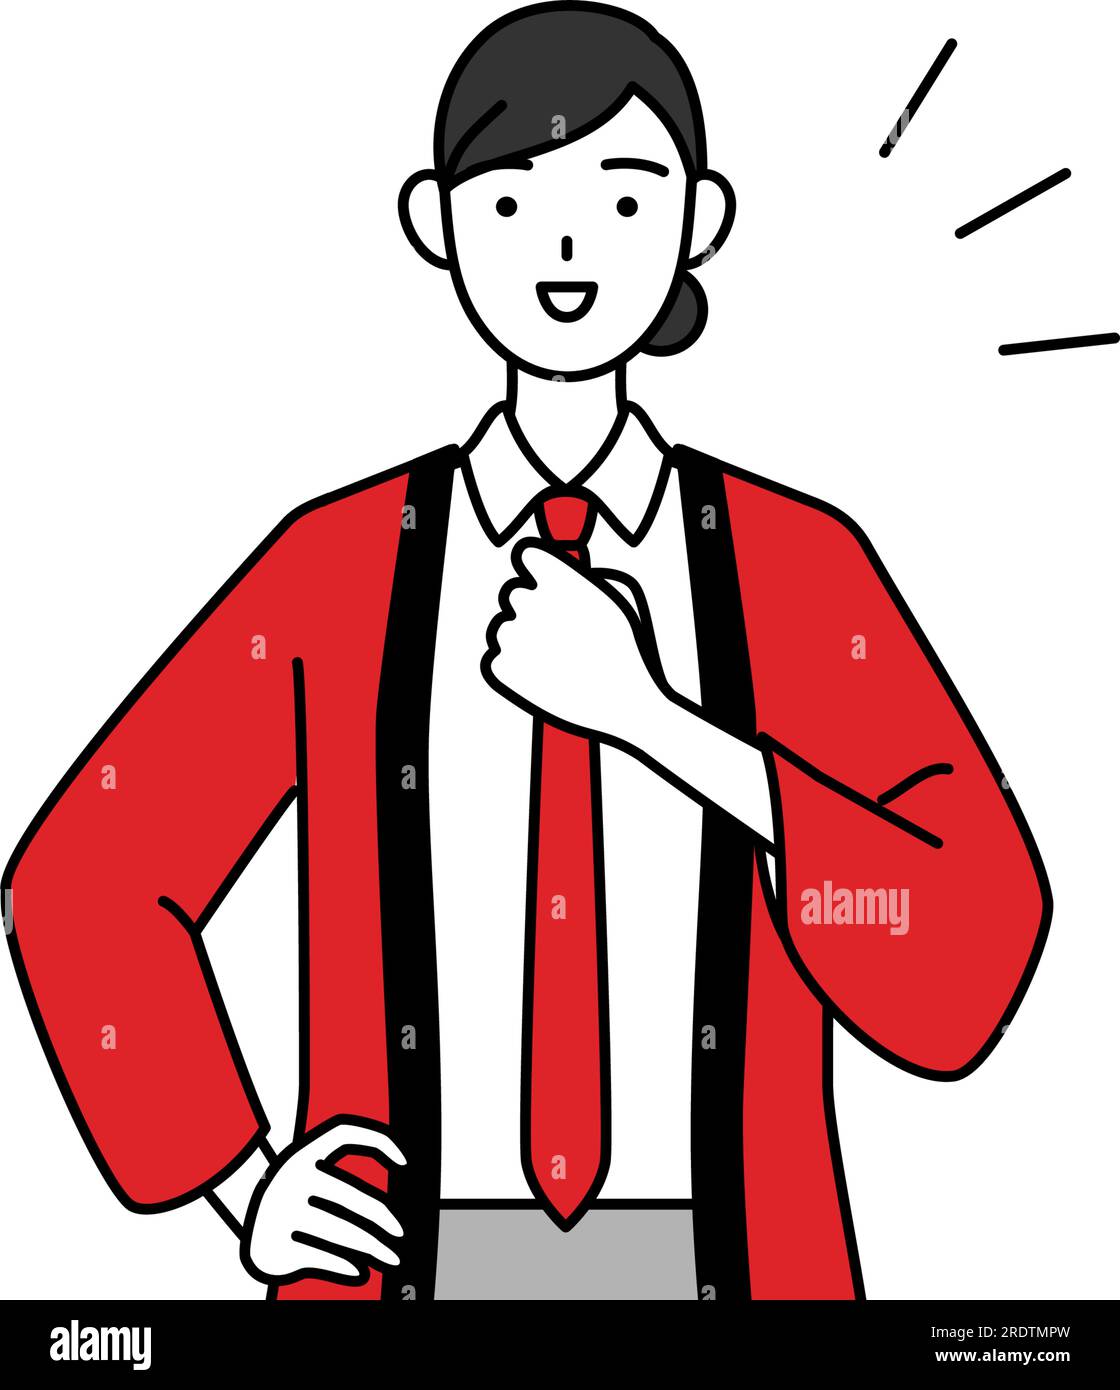 Woman wearing a red happi coat tapping her chest, Vector Illustration Stock Vector